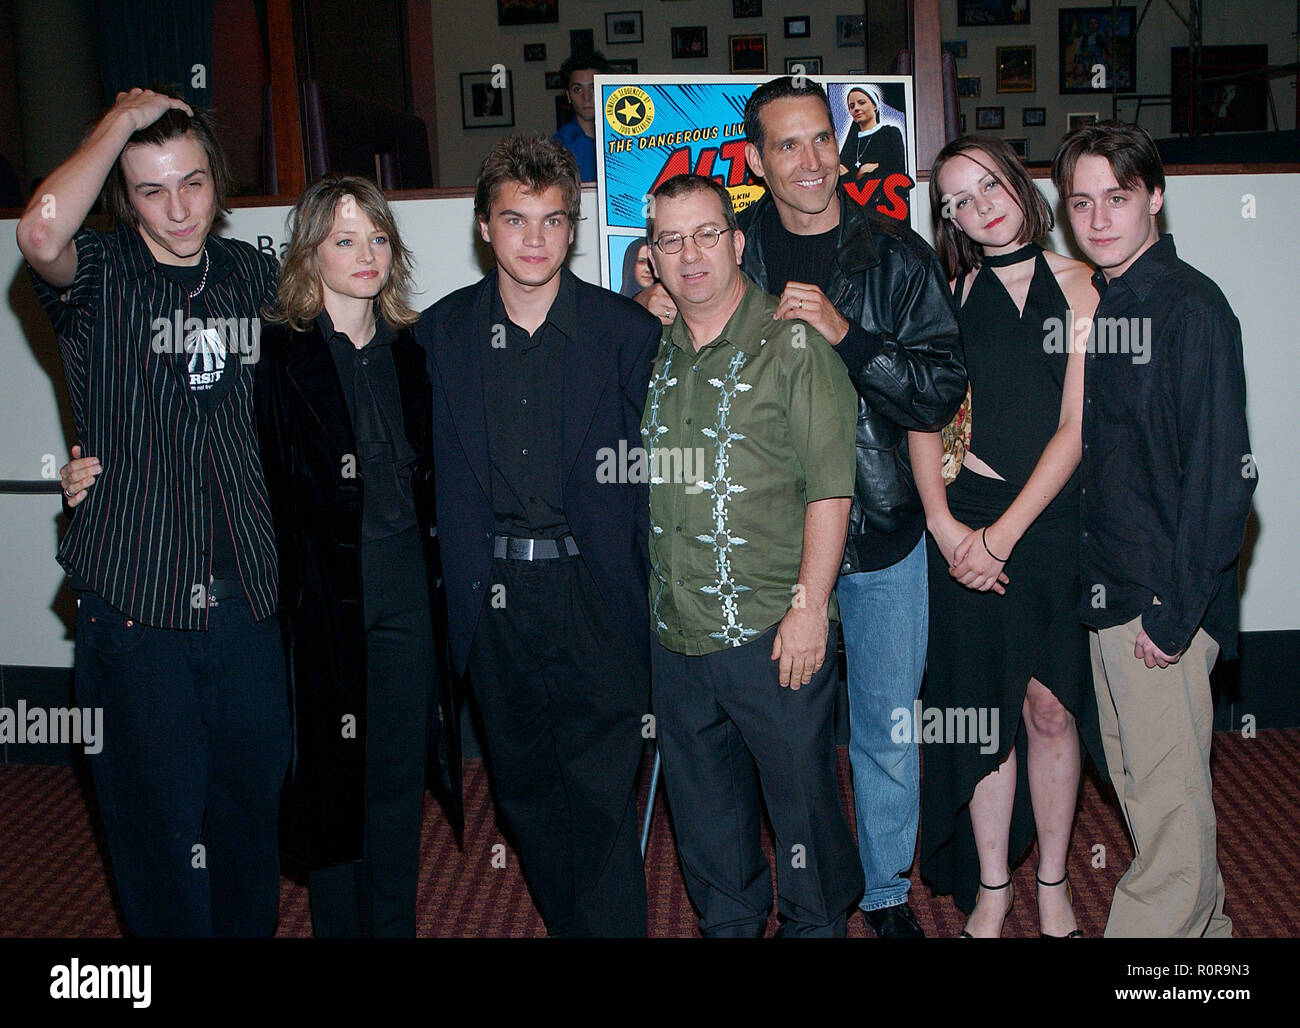 The cast, Jake Richardson, Jodie Foster, Emile Hirsh, the director Peter Care, the animator Todd McFarlane, Jena Malone and Kieran Culkin posing at th Stock Photo